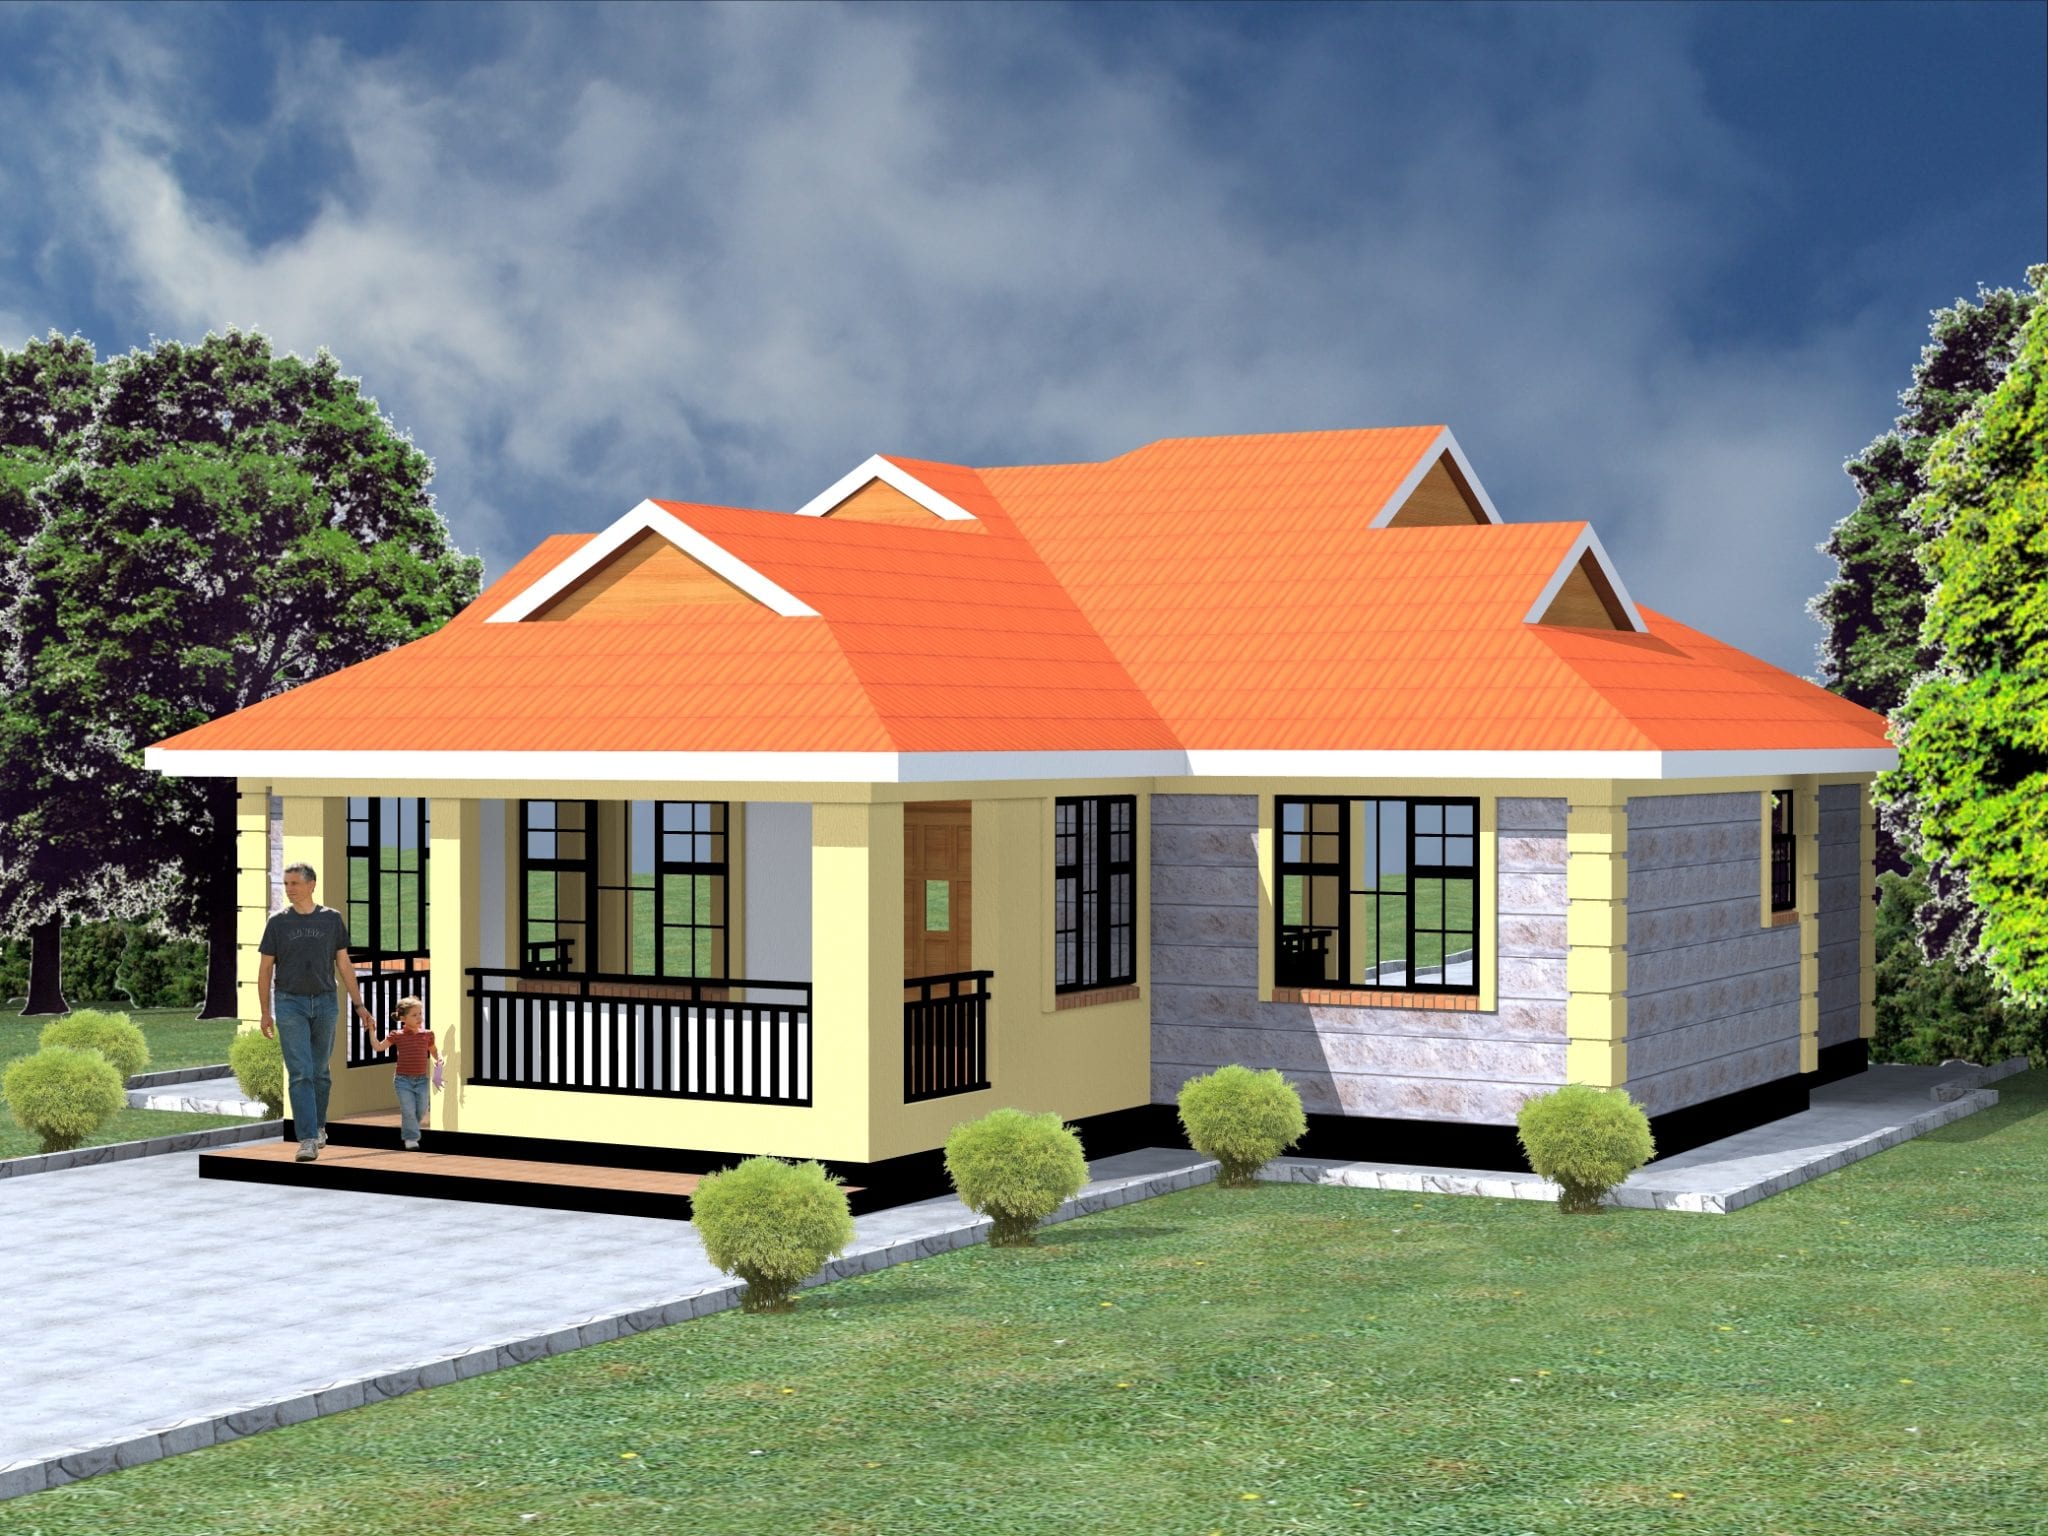 3 Bedroom bungalow house Check Details here | HPD Consult